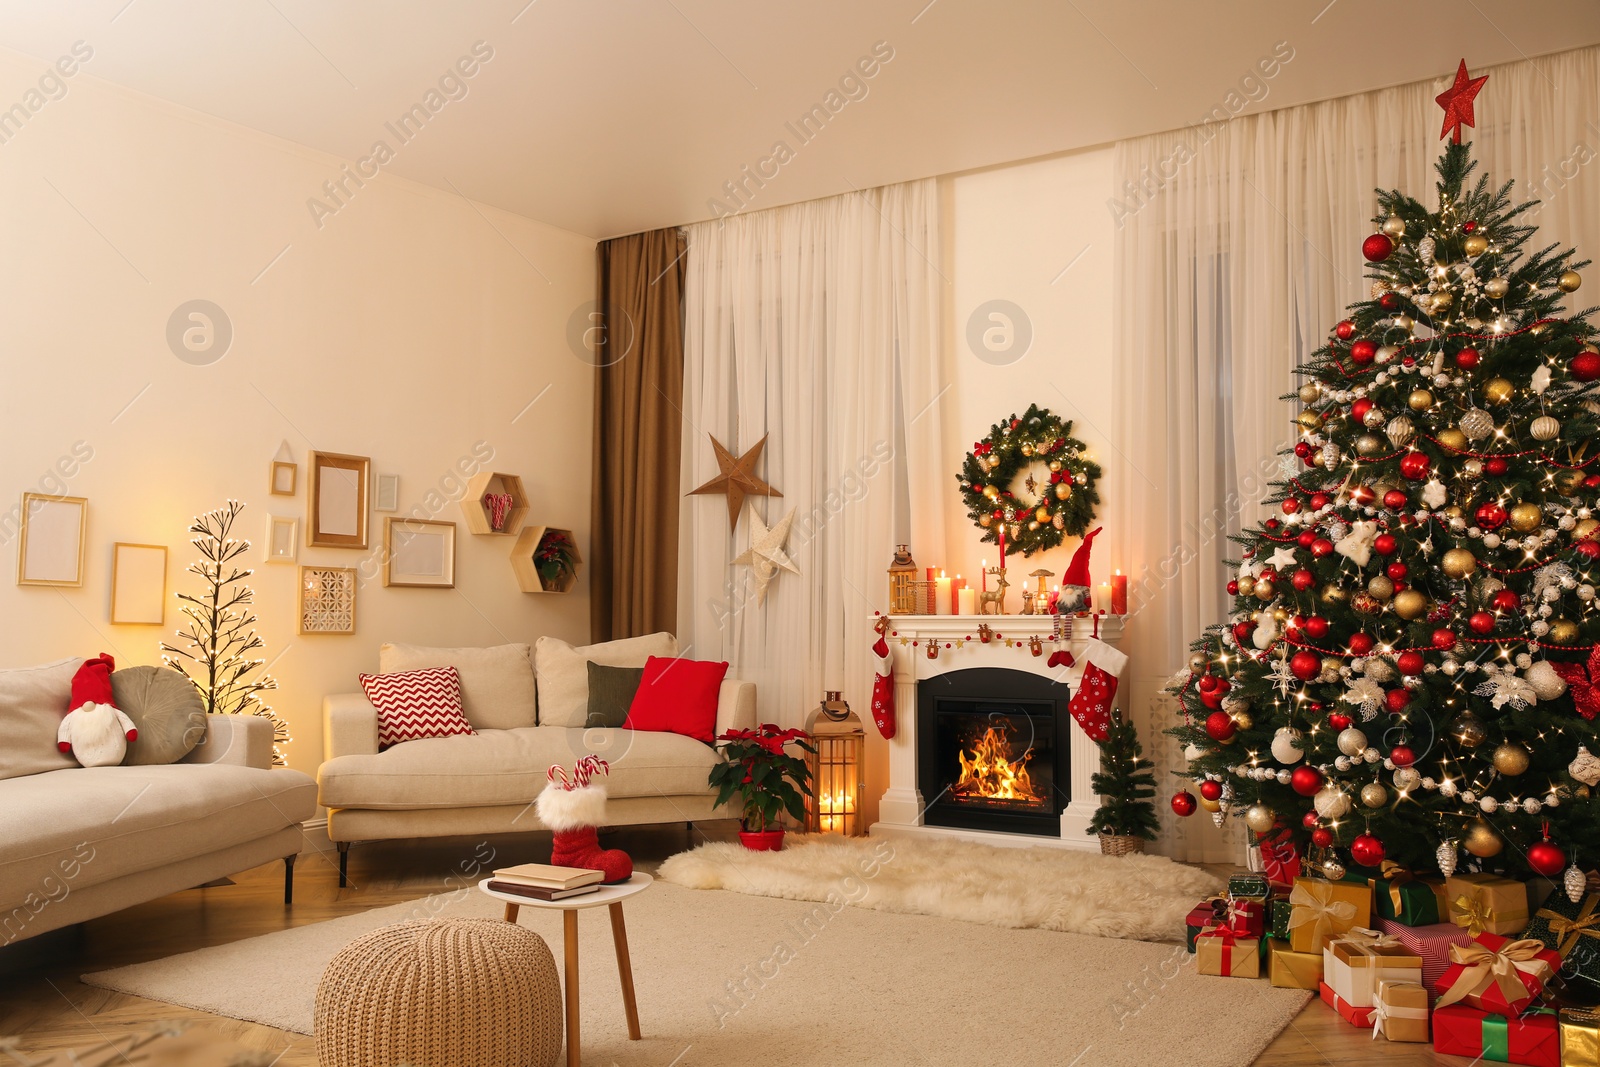 Photo of Festive living room interior with Christmas tree near fireplace